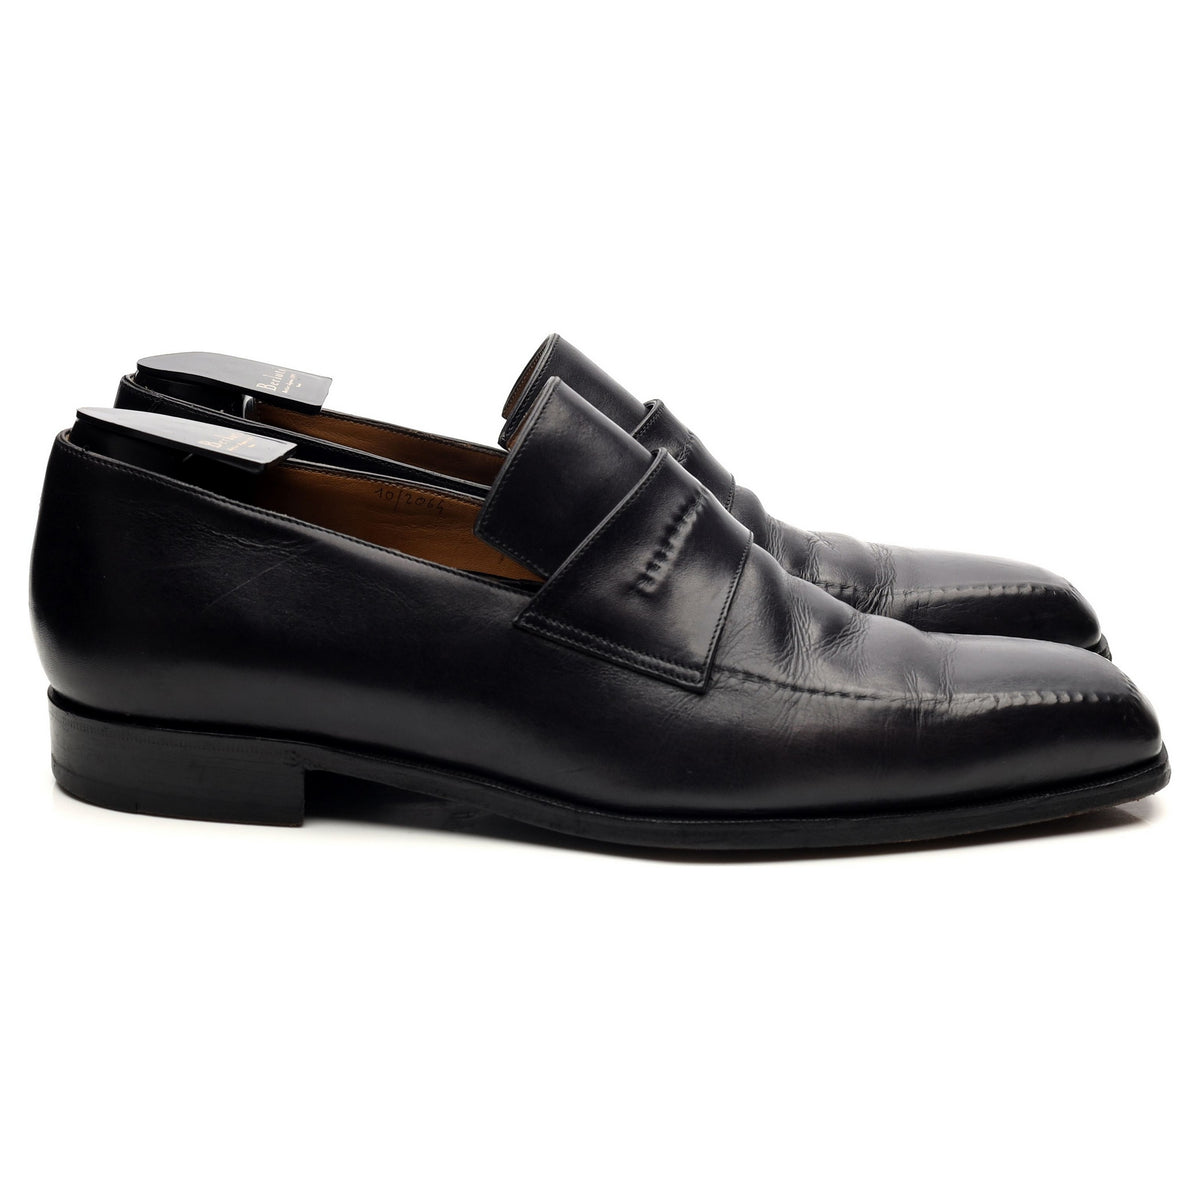 Black Leather Loafers UK 10